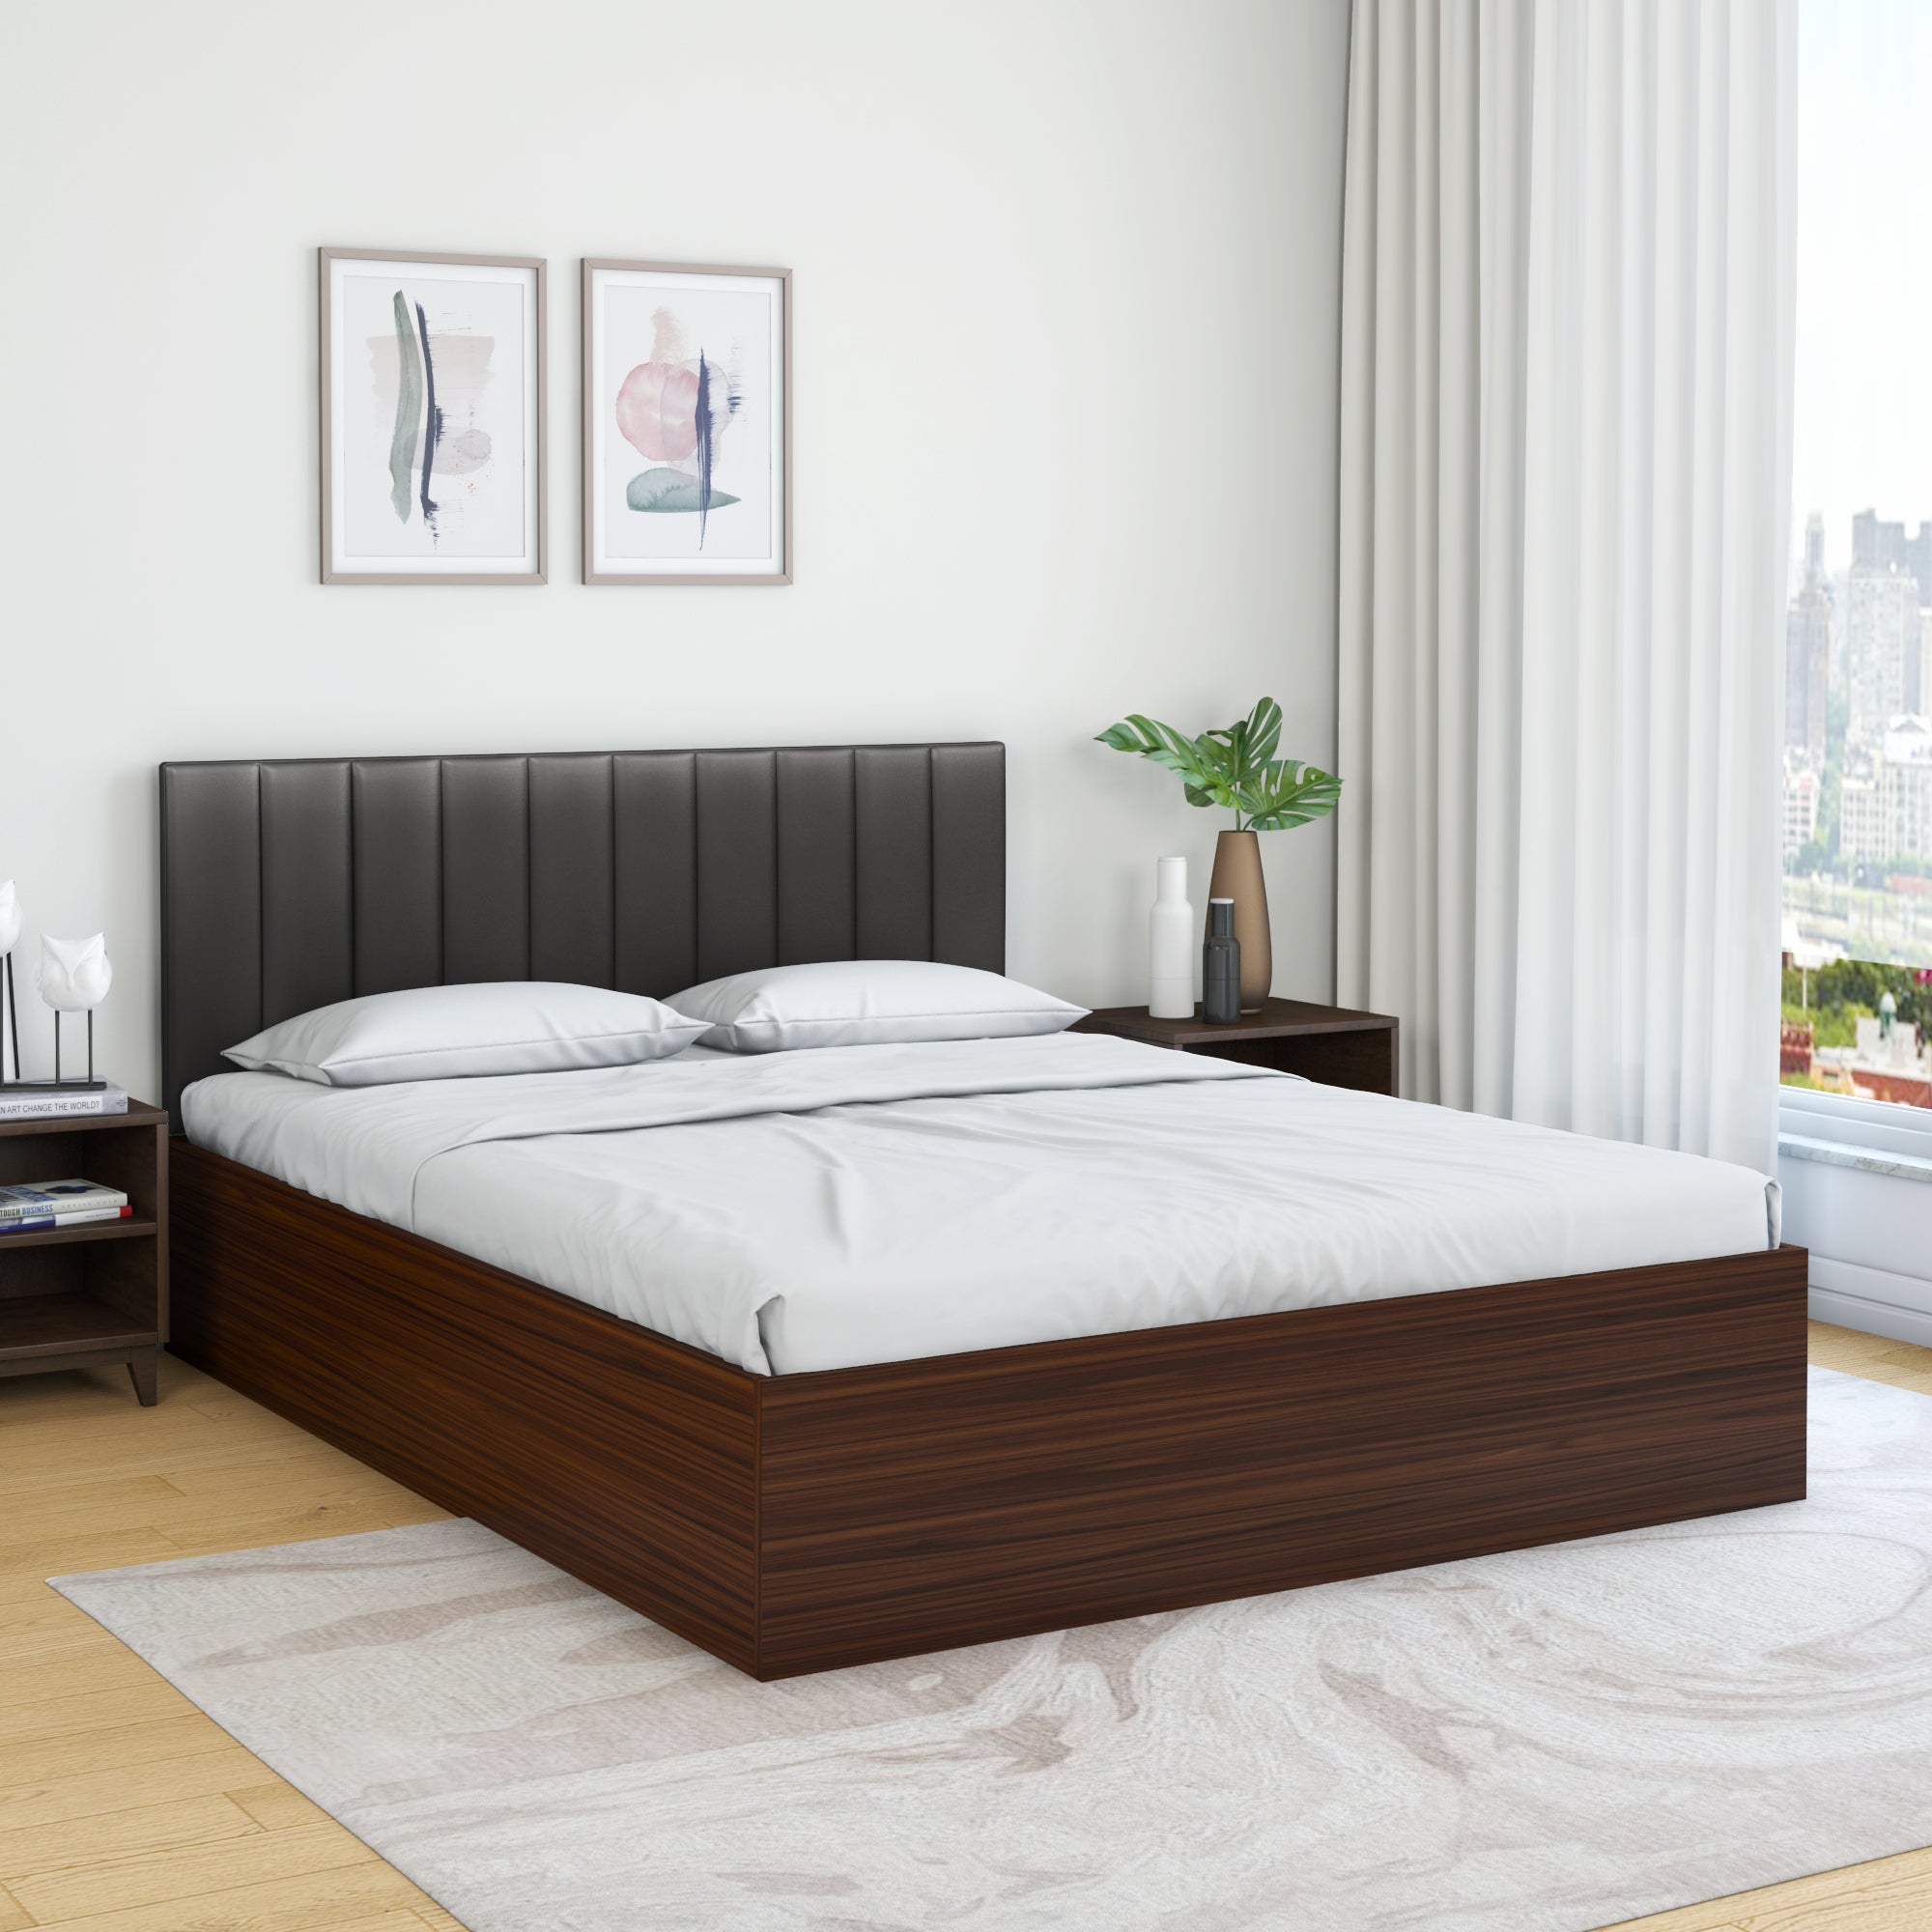 Fusion Upholstered Wall Mounted Headboard Engineered Wood King Bed with Box Storage (Grey & Walnut)